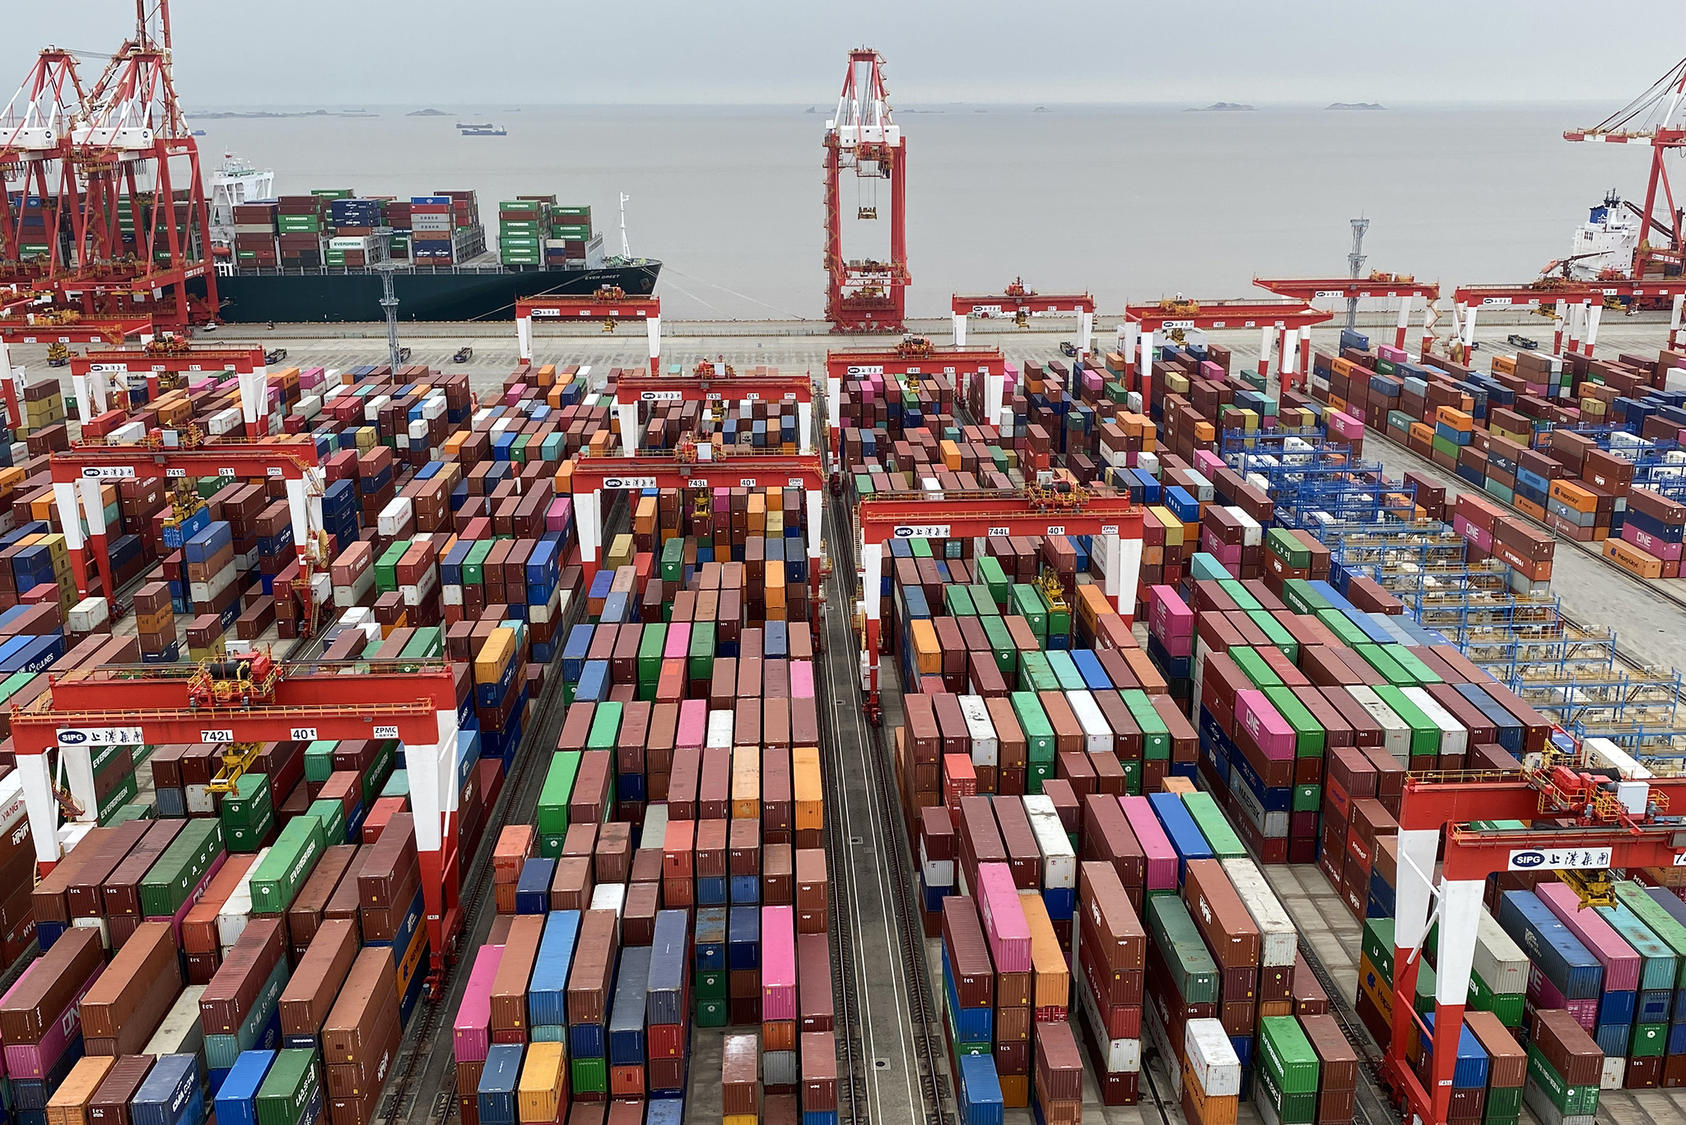 The freight yard at Shanghai's port. June 17, 2021. (Keith Bradsher/The New York Times)